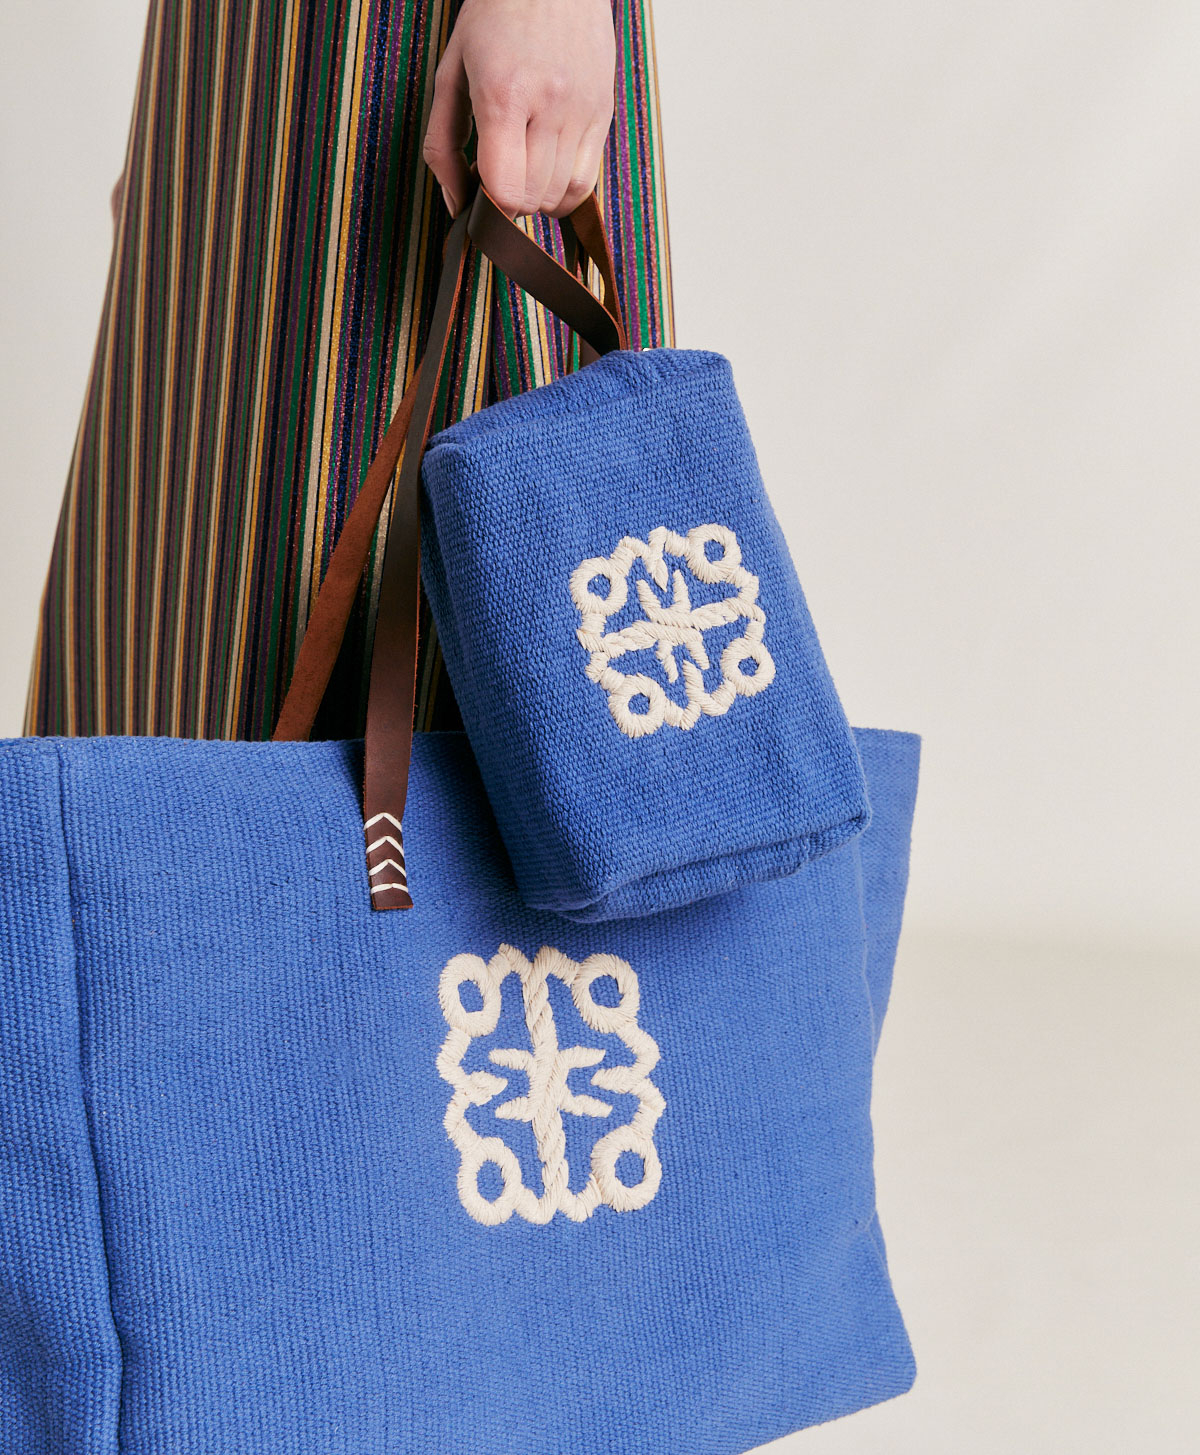 PIRA BAG IN EMBROIDERED CANVAS - BLUE - Momonì